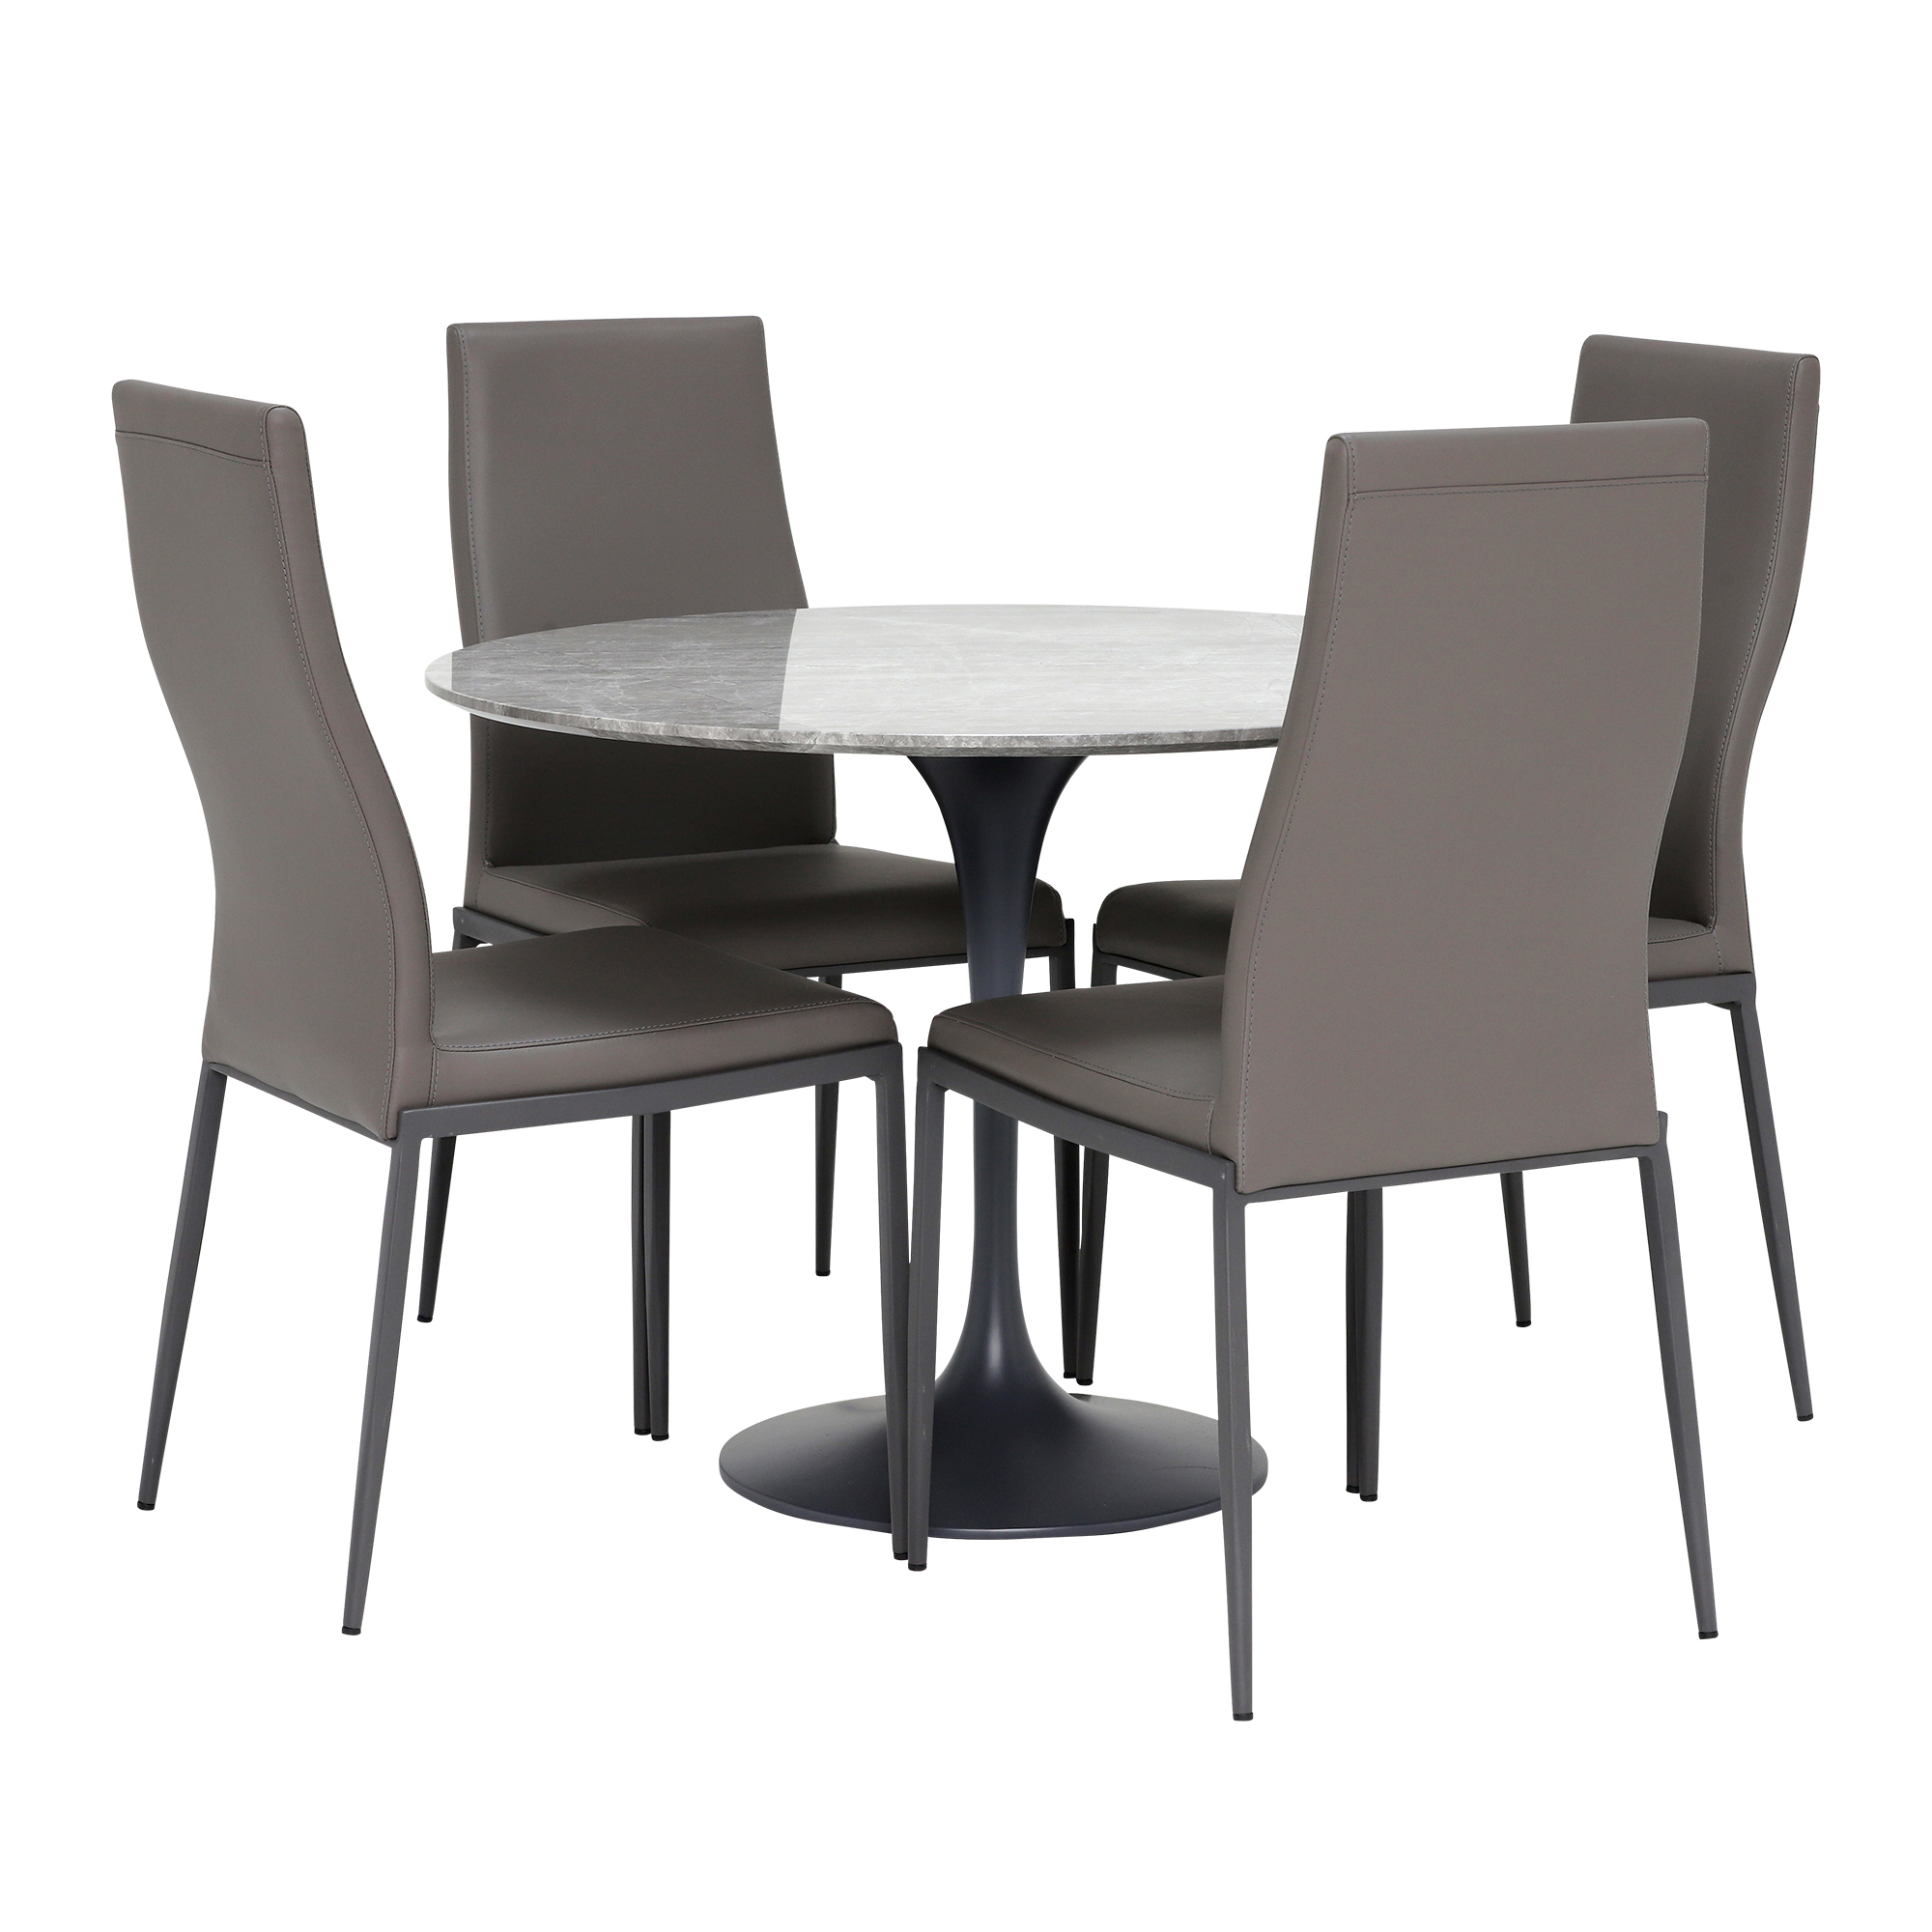 Nell Round Marble Dining Table 4 Grey Chairs Barker Stonehouse pertaining to dimensions 2000 X 2000